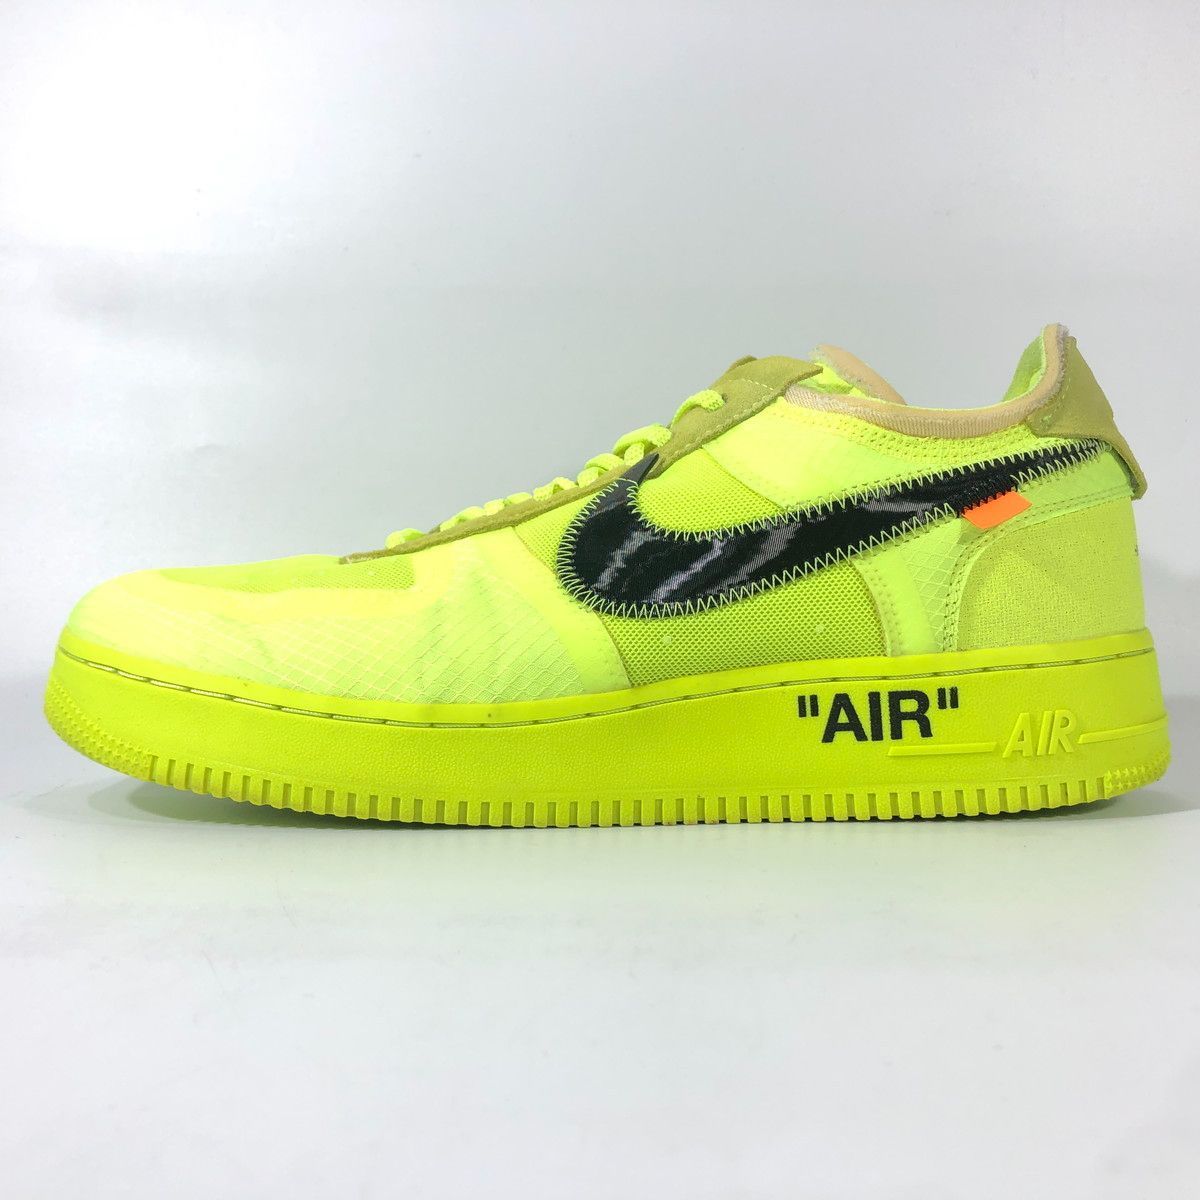 NIKE ナイキ THE 10 : NIKE AIR FORCE 1 LOW Volt AO4606-700 28.5cm US10.5 宅急便